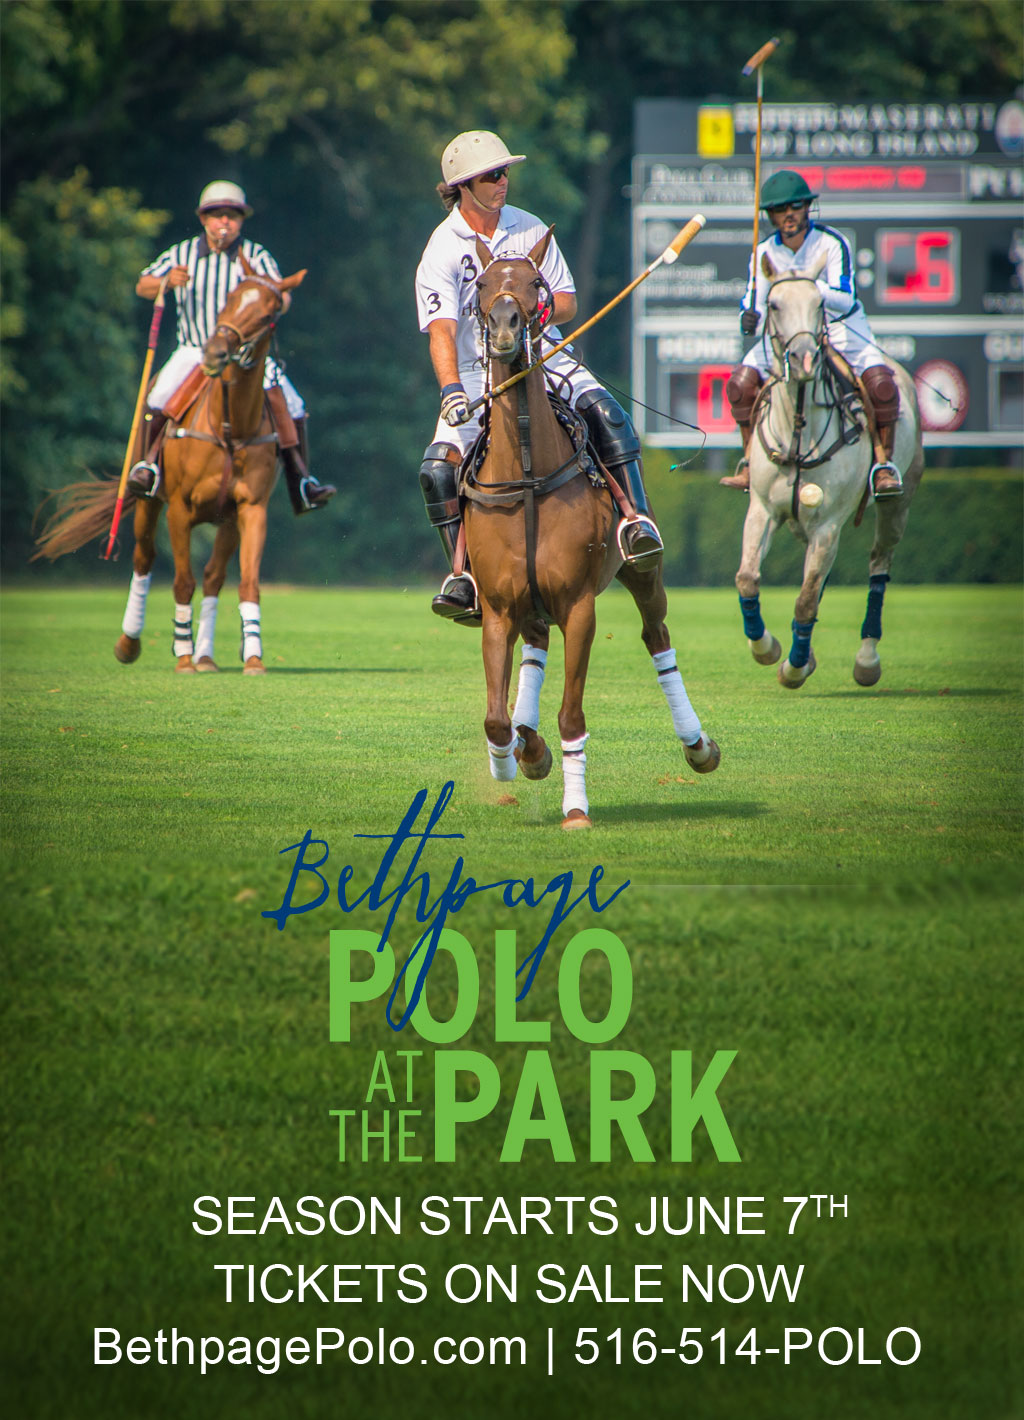 Bethpage Polo at the Park